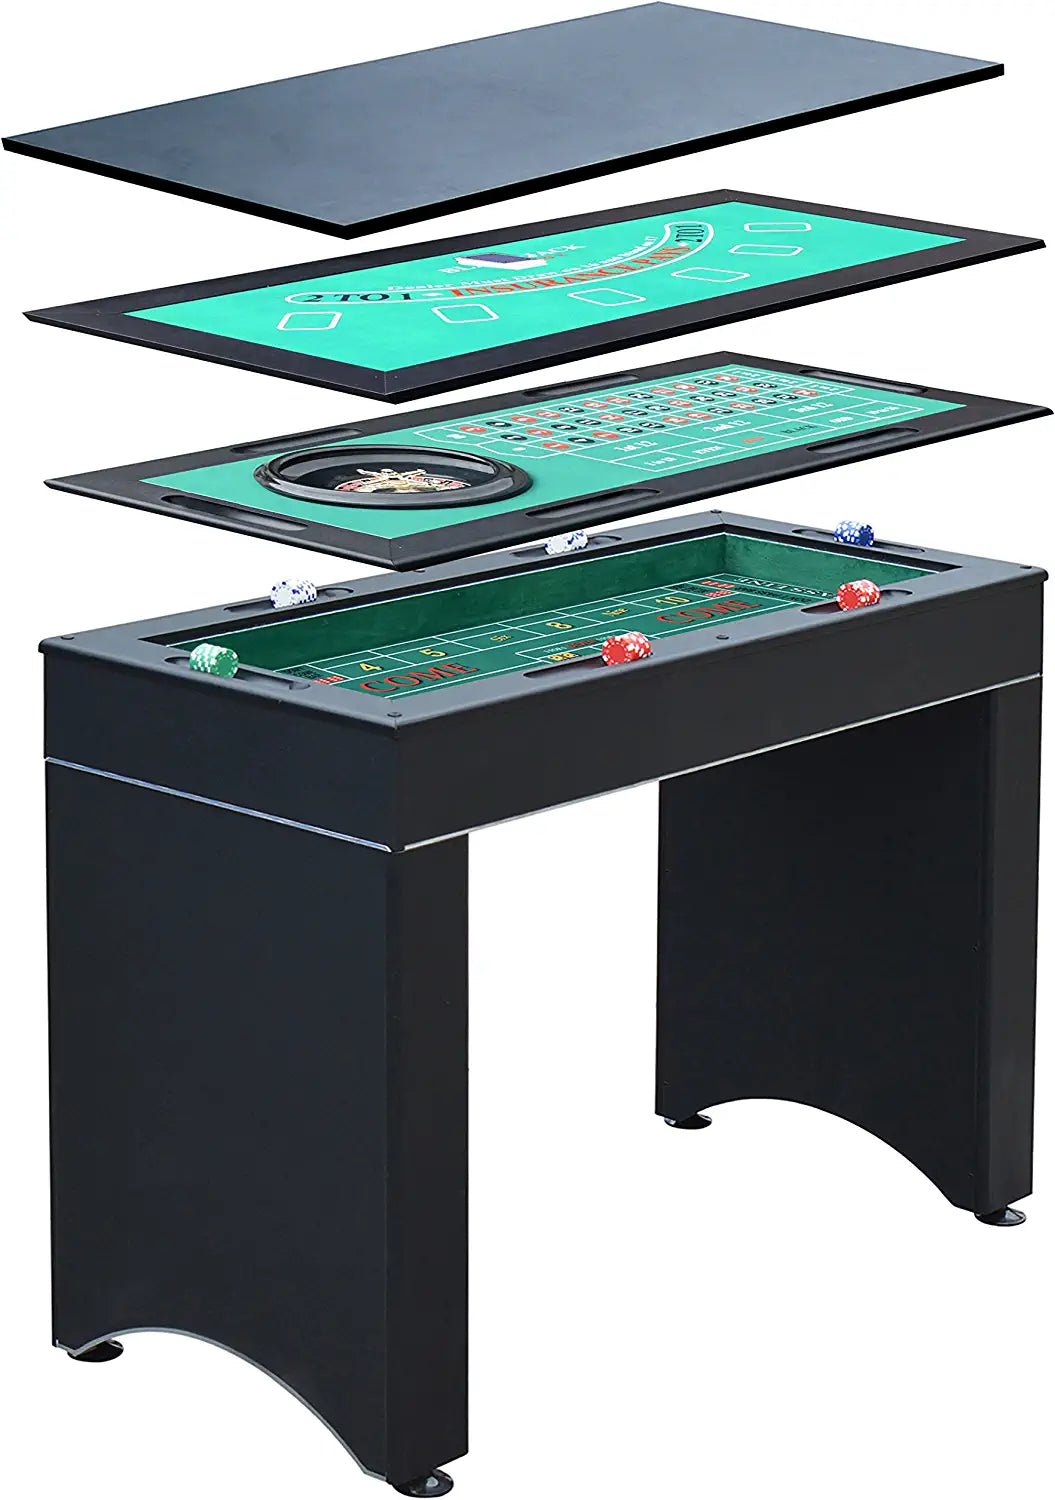 Hathaway Monte Carlo 4-In-1 Multi Game Casino Table with Blackjack, Roulette, Craps and Bar Table √É¬¢√¢‚Äö¬¨√¢‚Ç¨≈ì Includes Accessories